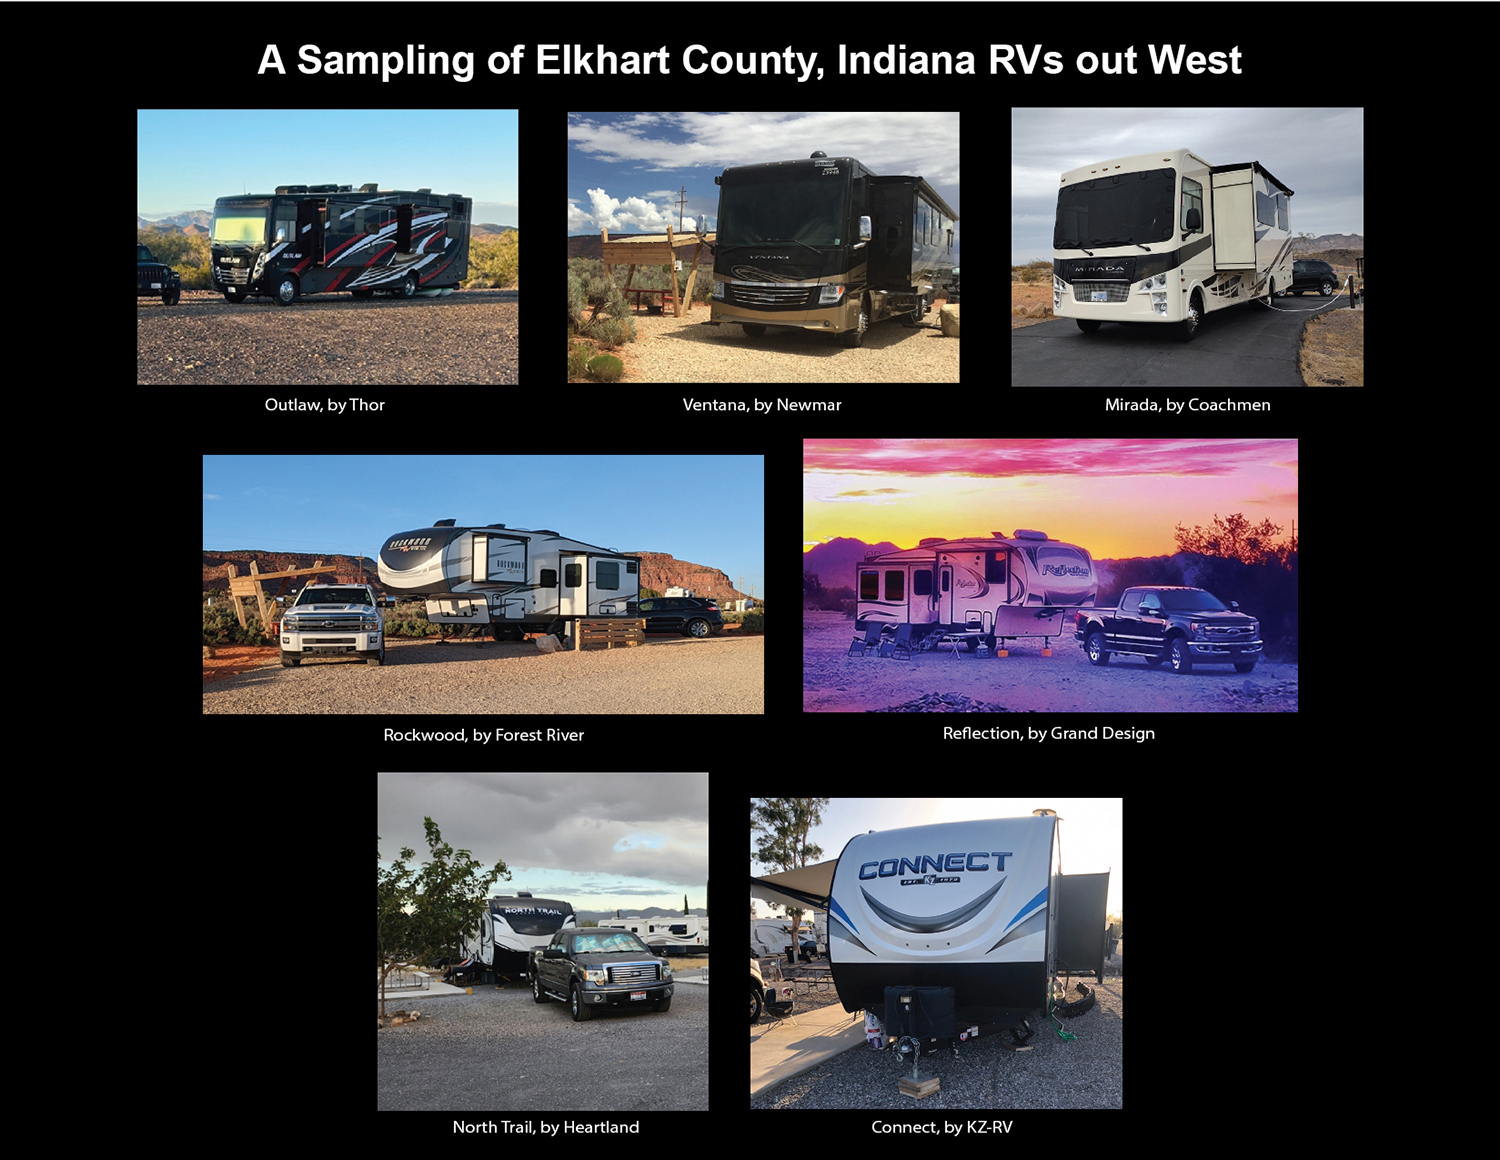 Elkhart County Manufactured RVs and Campers at an Arizona Campground - Elkhart County, The RV Capitol of the World